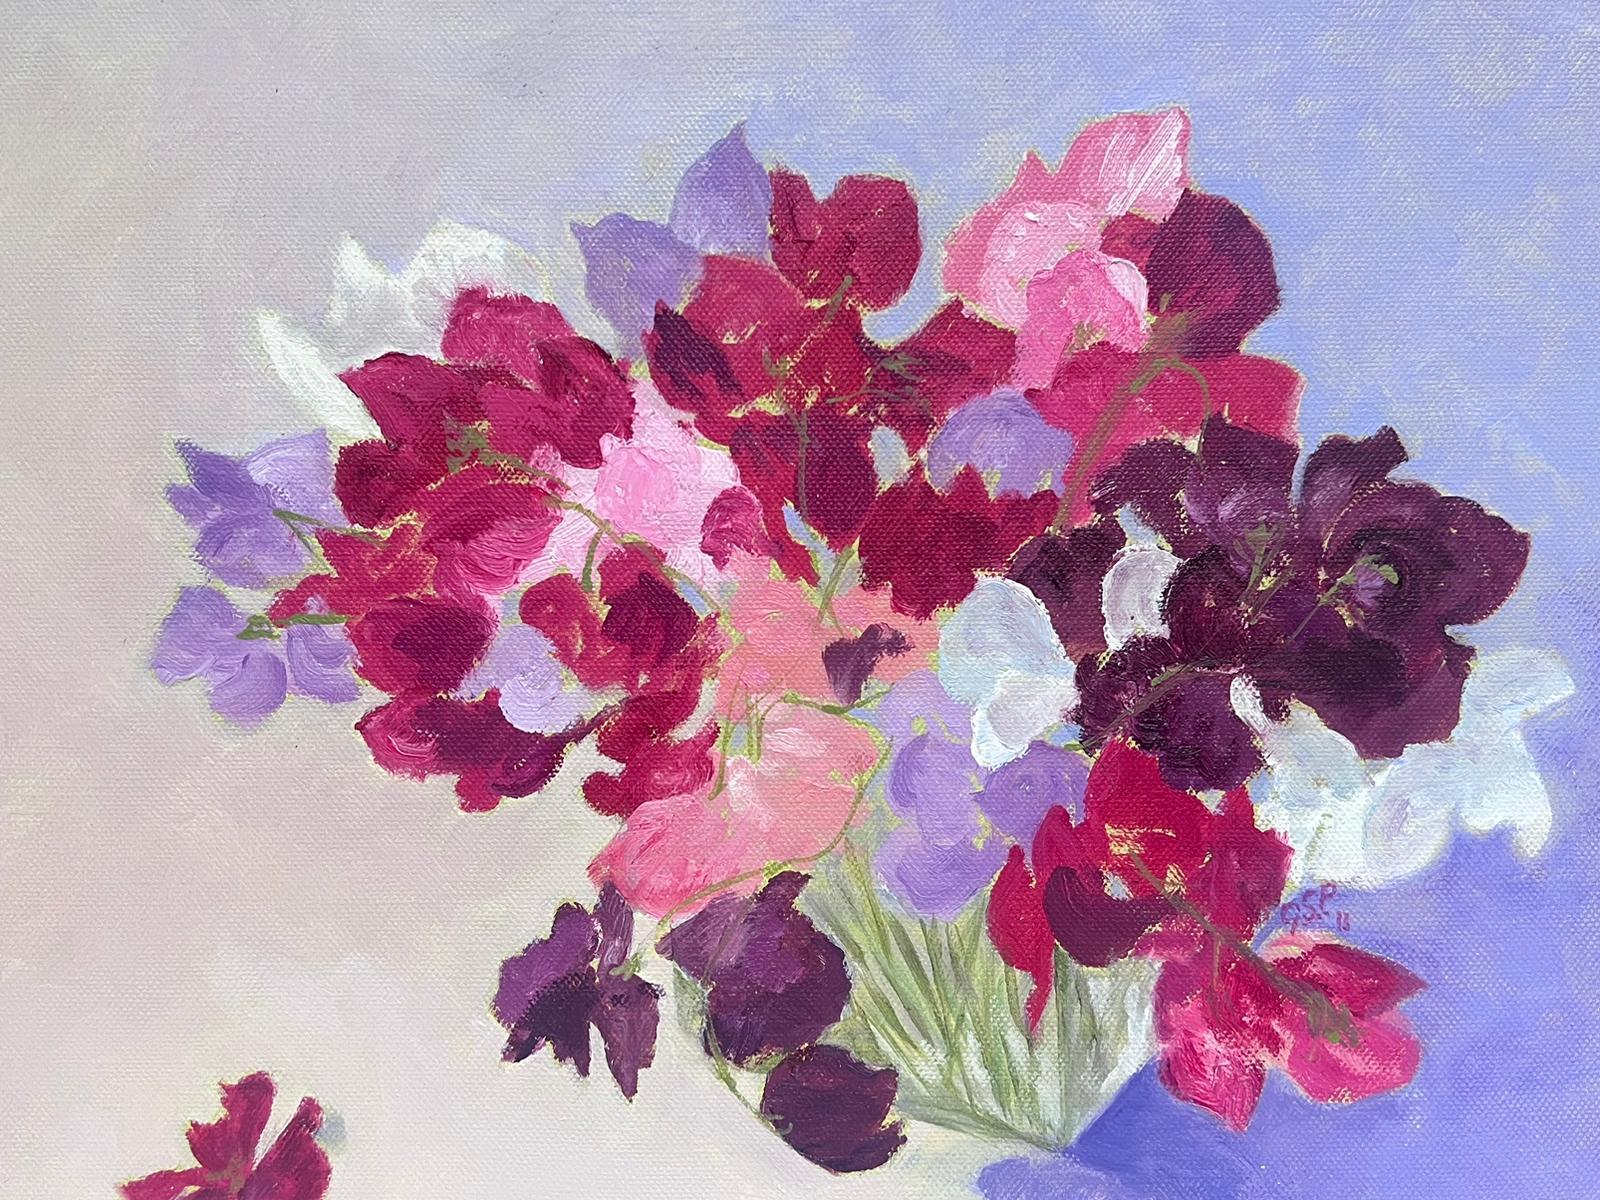 Sweet Peas
by Geza Somerset-Paddon (British 20th century)
signed with initials and titled verso
oil painting on canvas , unframed
canvas: 14 x 18 inches
condition: overall very good
provenance: all the paintings we have by this artist have come from